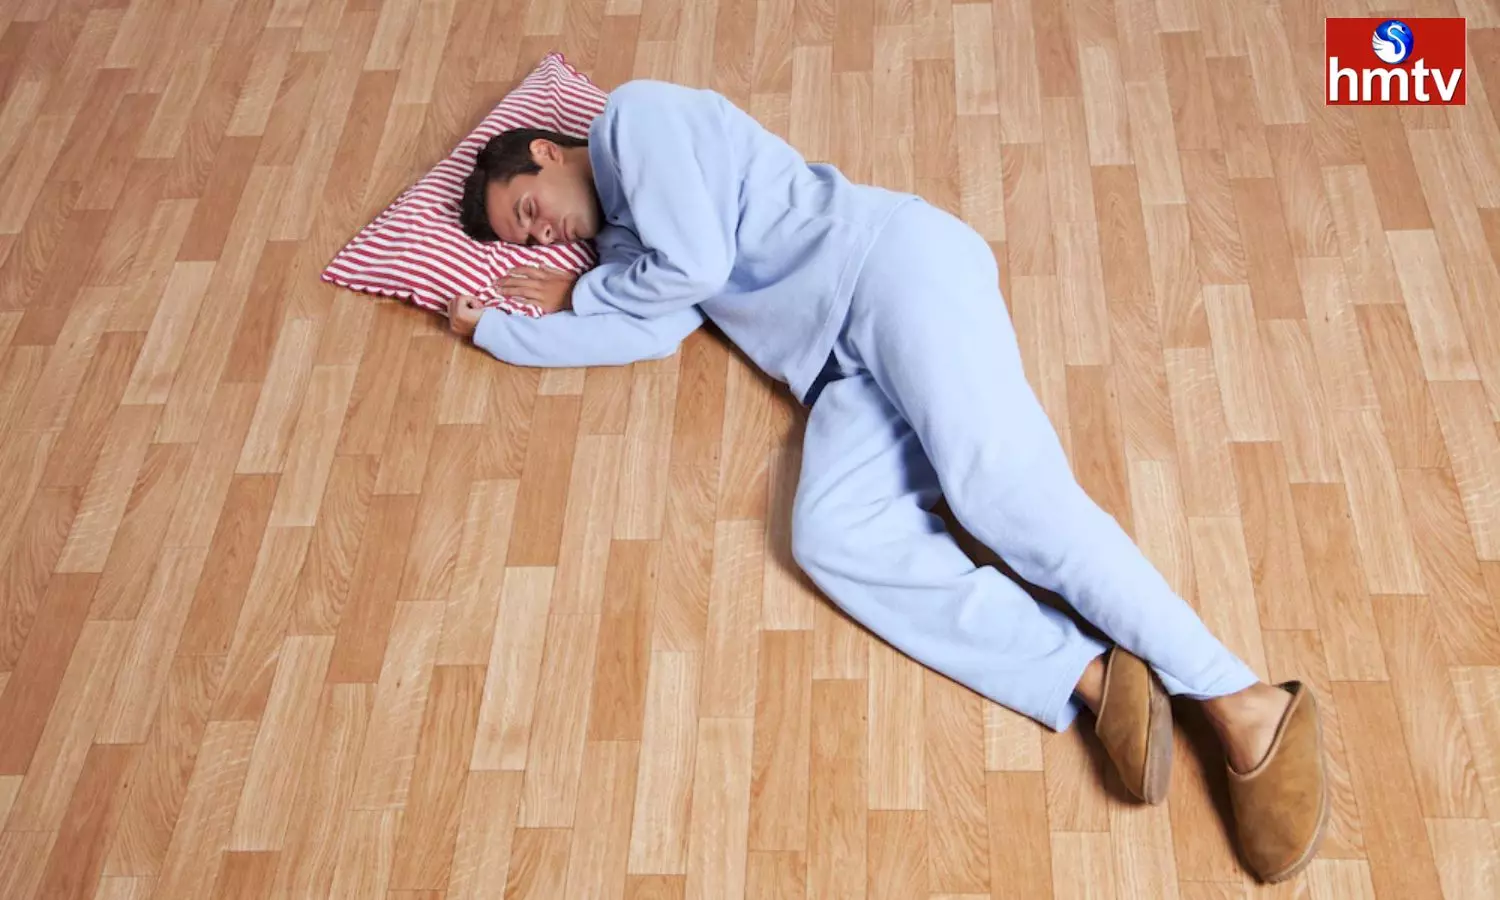 Sleeping On The Floor Has Many Benefits For The Body If You Know You Will Say Goodbye To The Bed